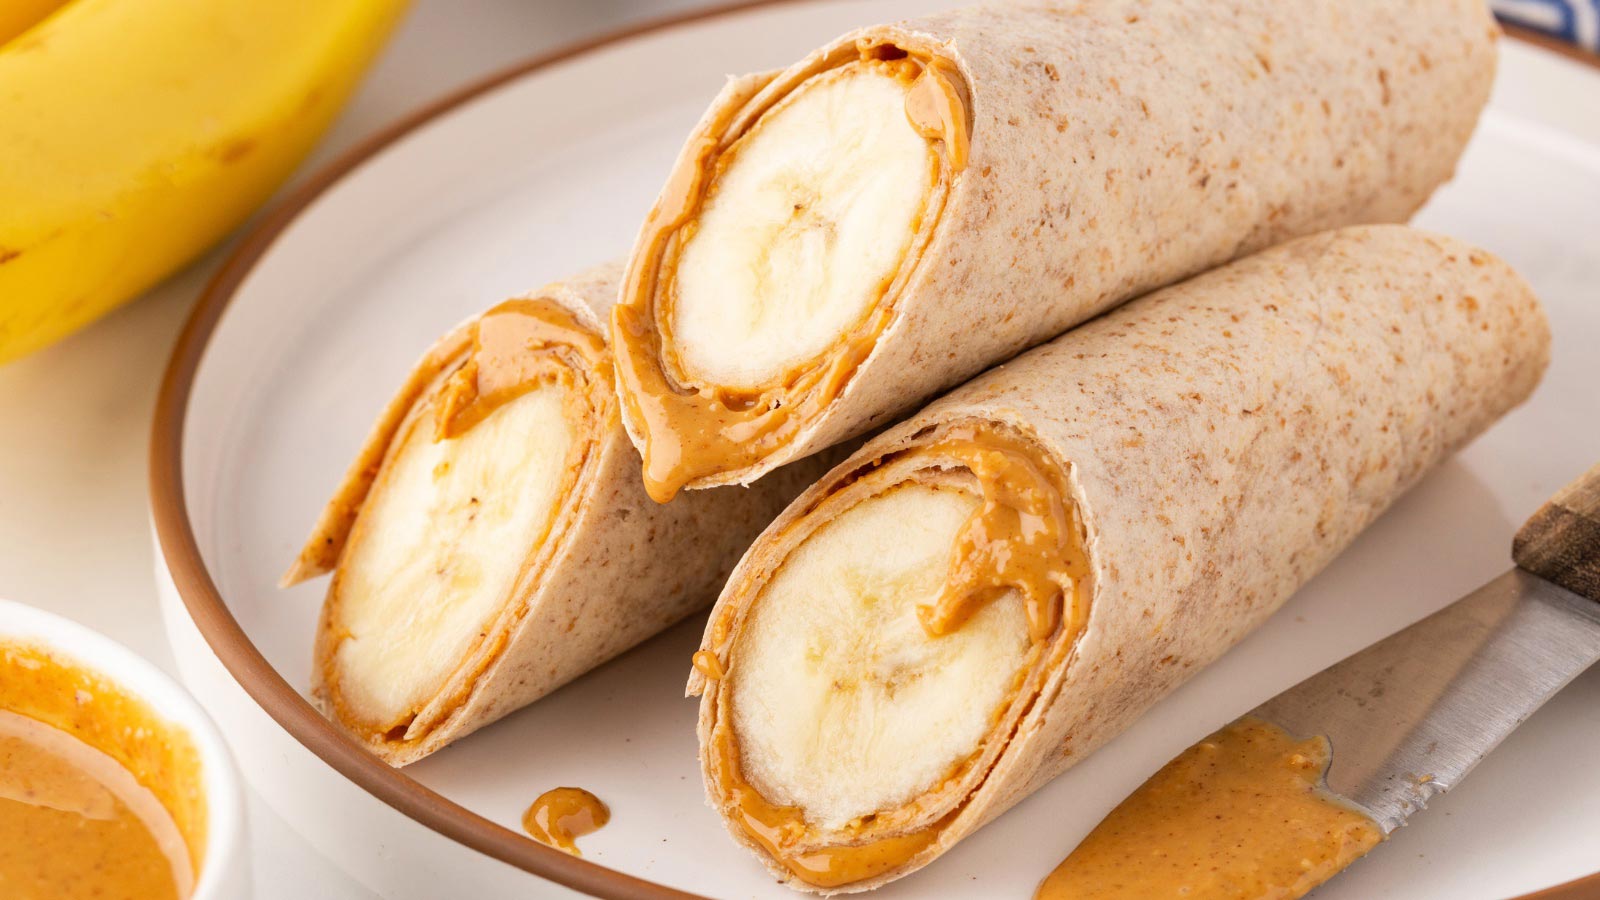 Three banana wraps stacked on a plate.